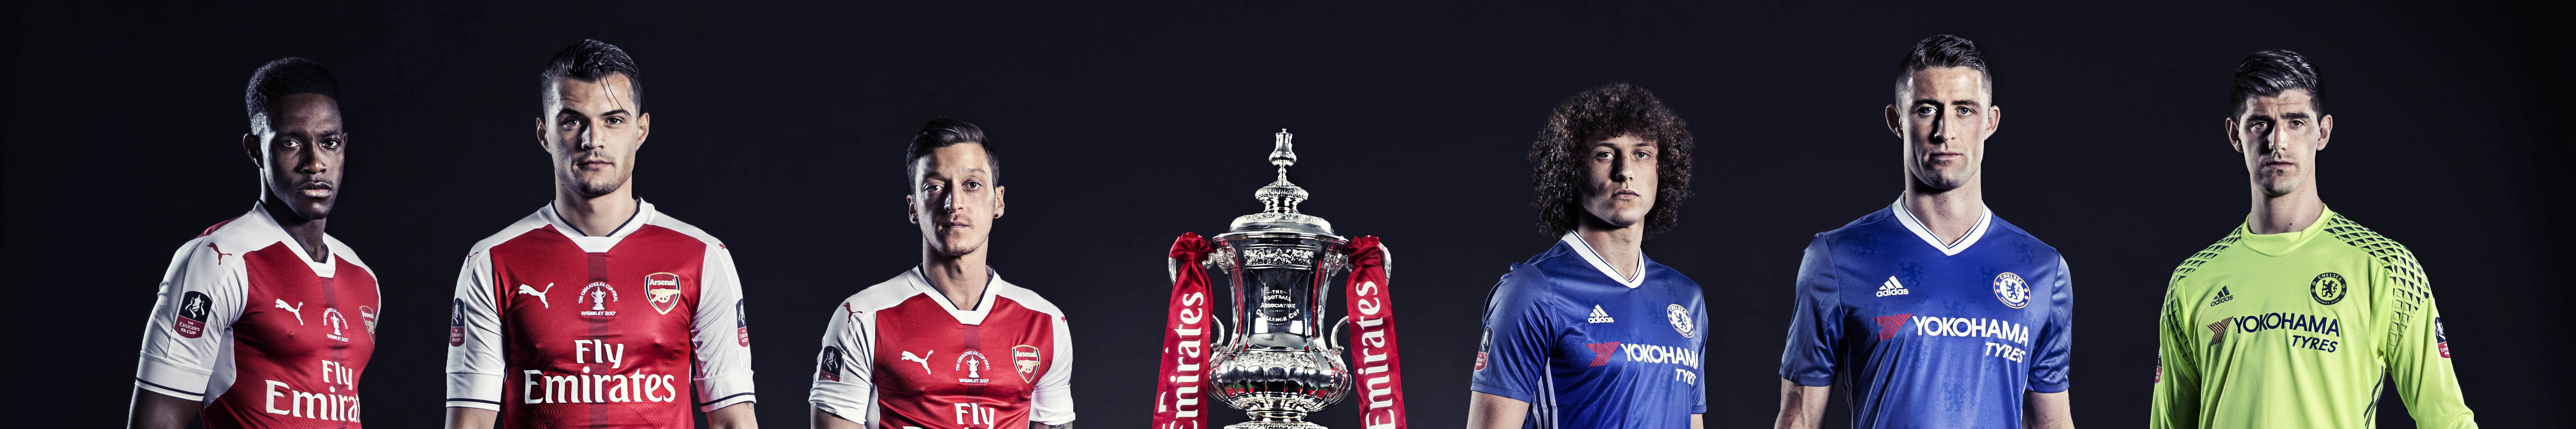 FA Cup final facts and figures: Arsenal vs Chelsea